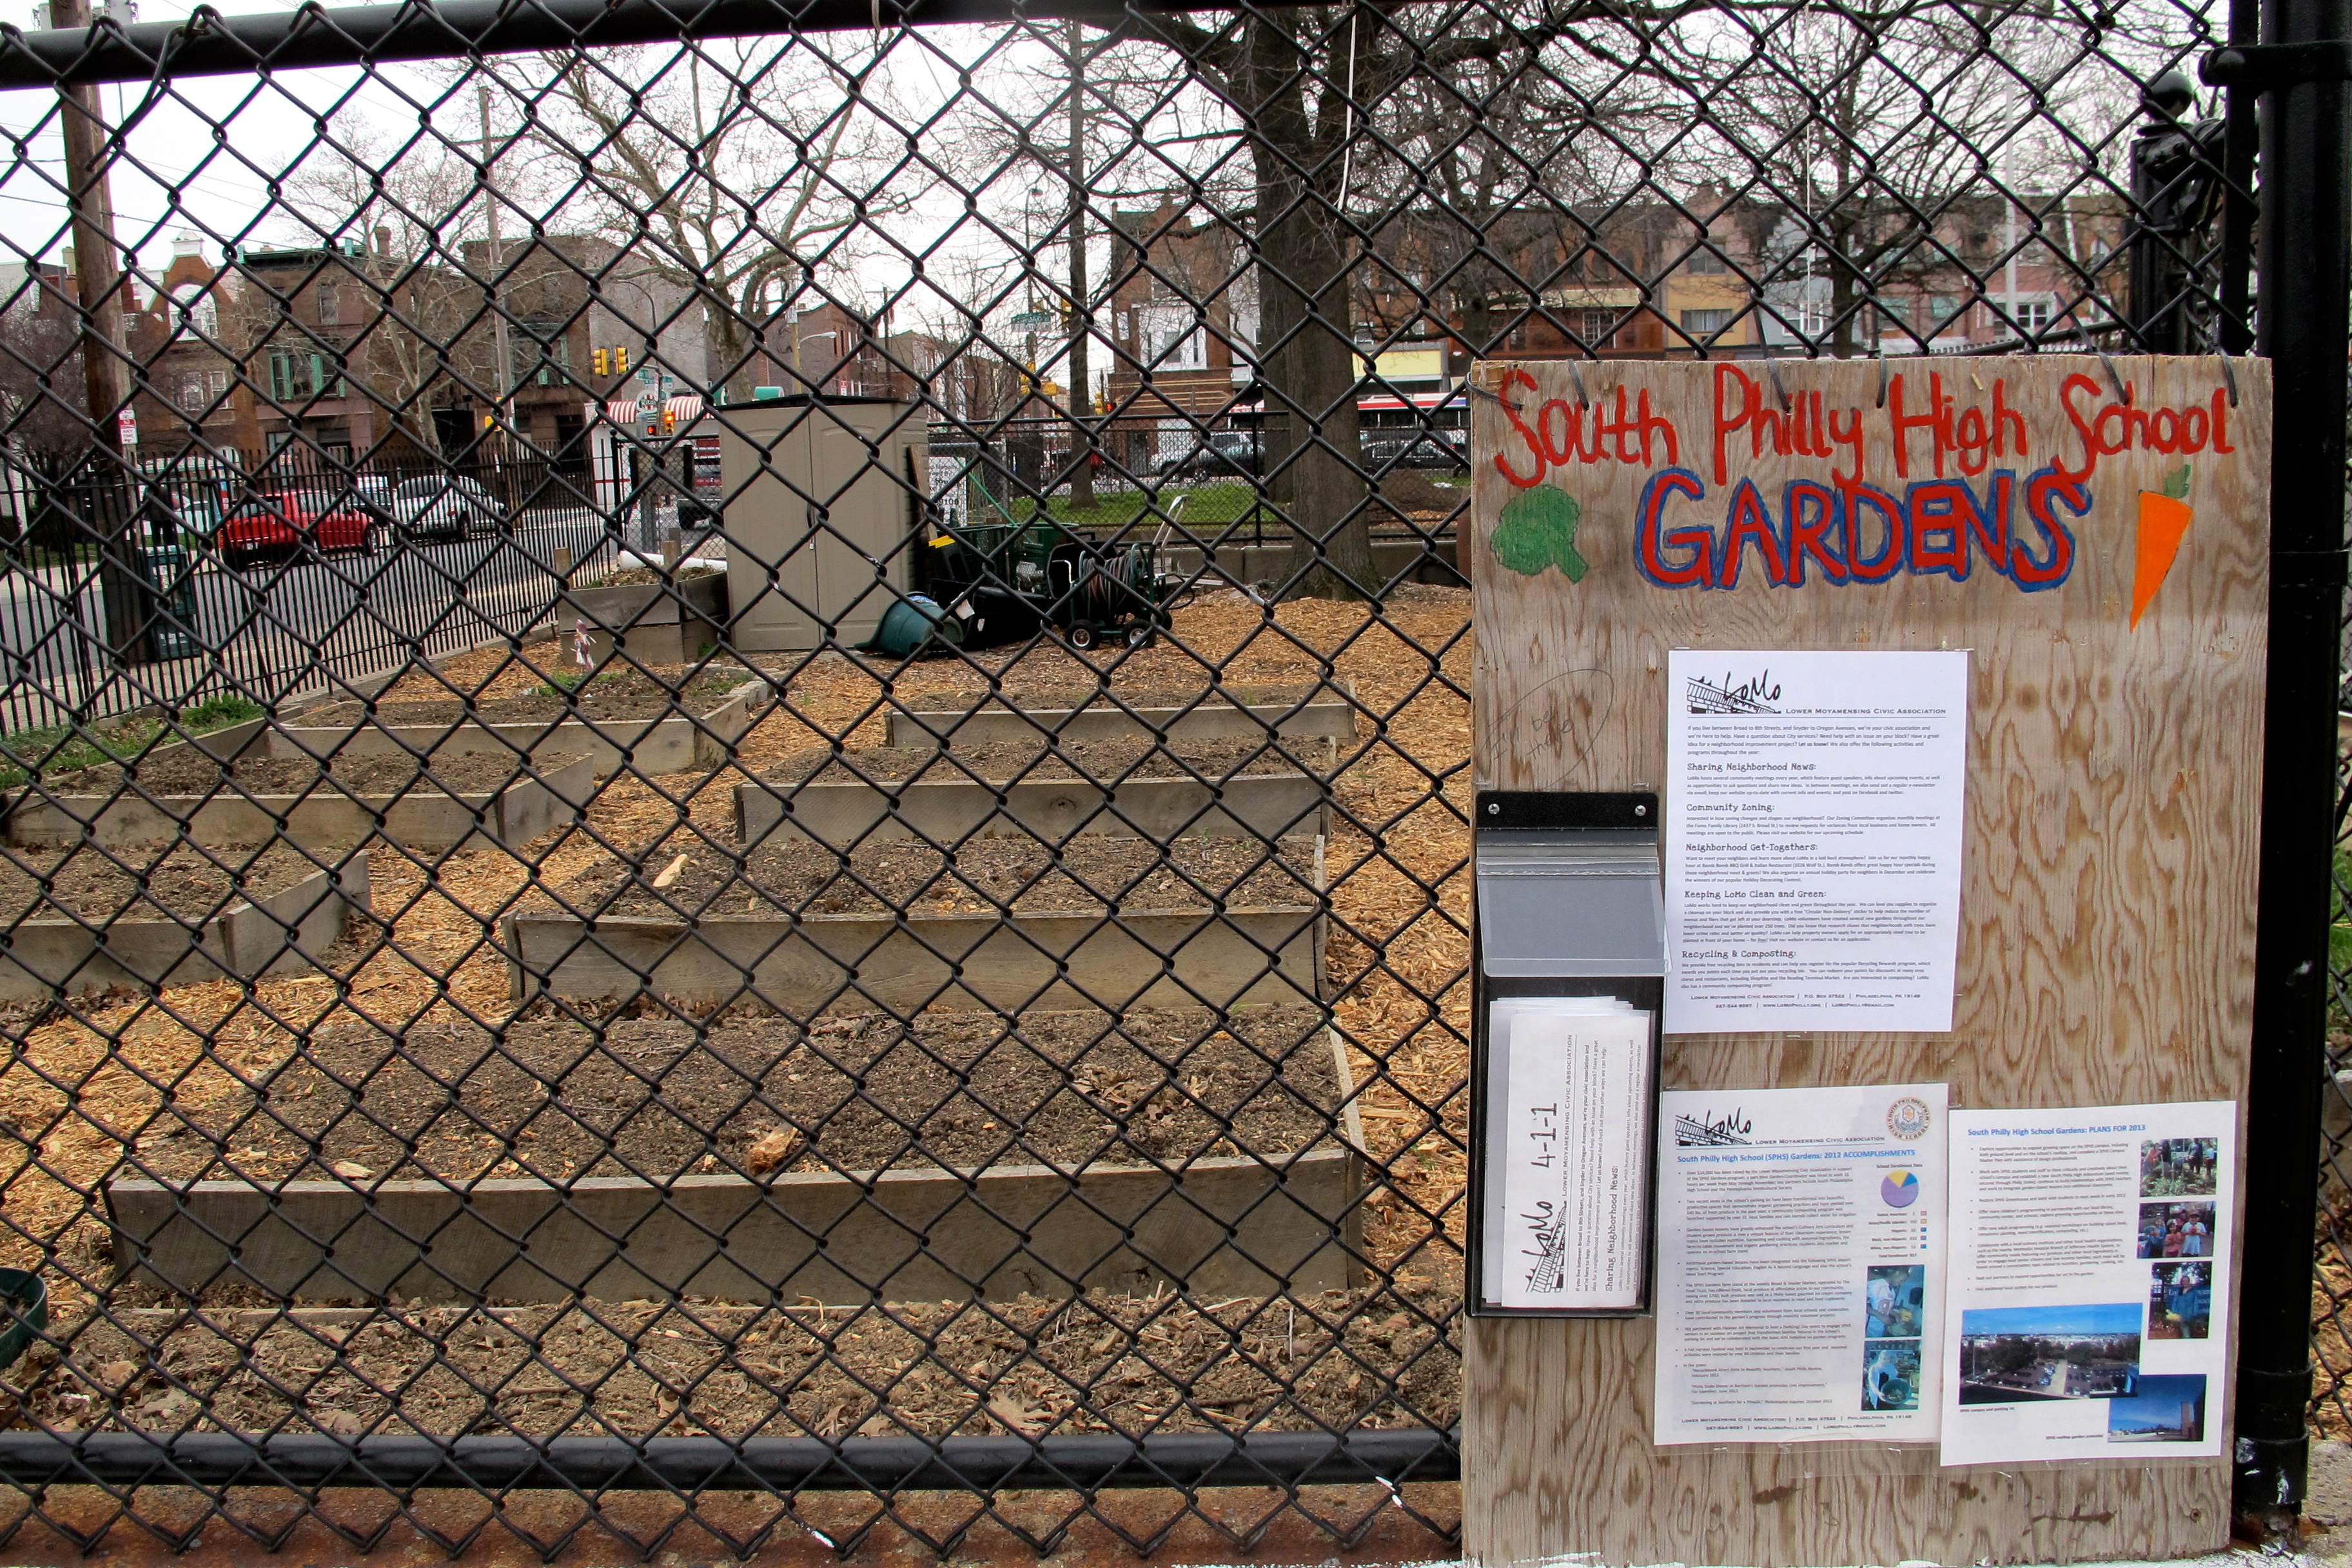 South Philly High School Gardens await spring plantings.